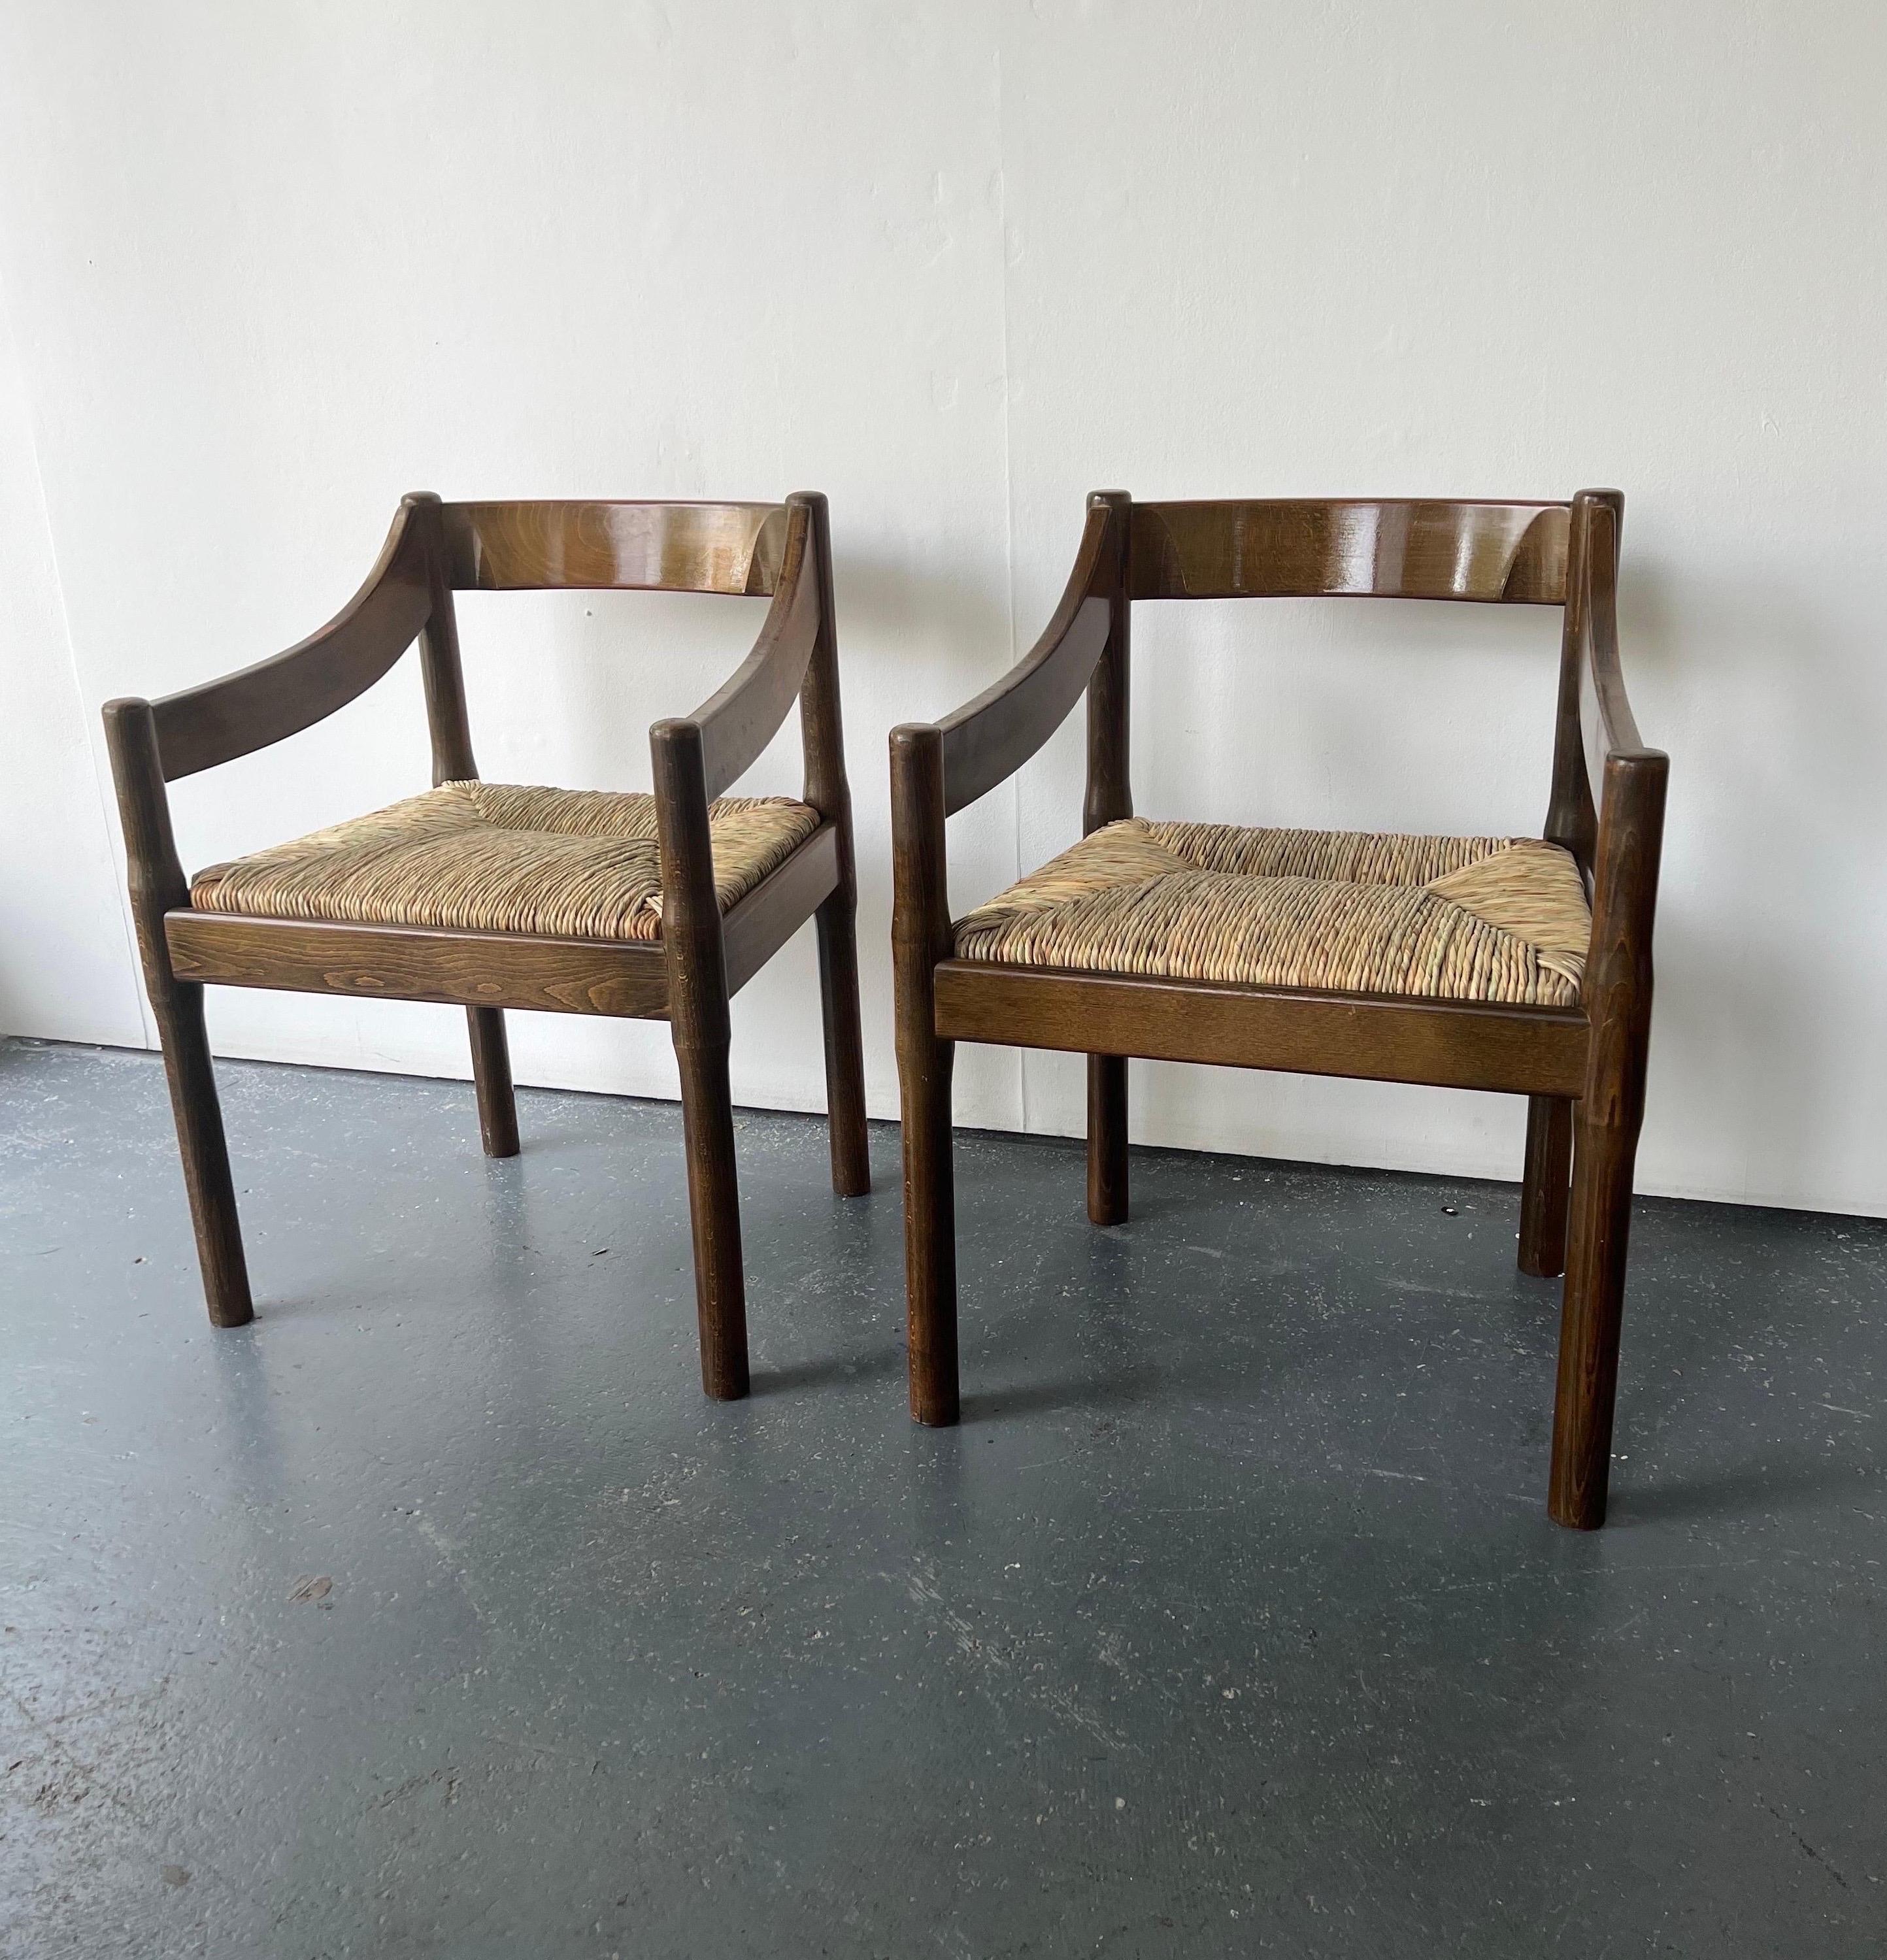 Mid-Century Modern Pair of Dark Wood Carimate Carver Chairs by Vico Magistretti